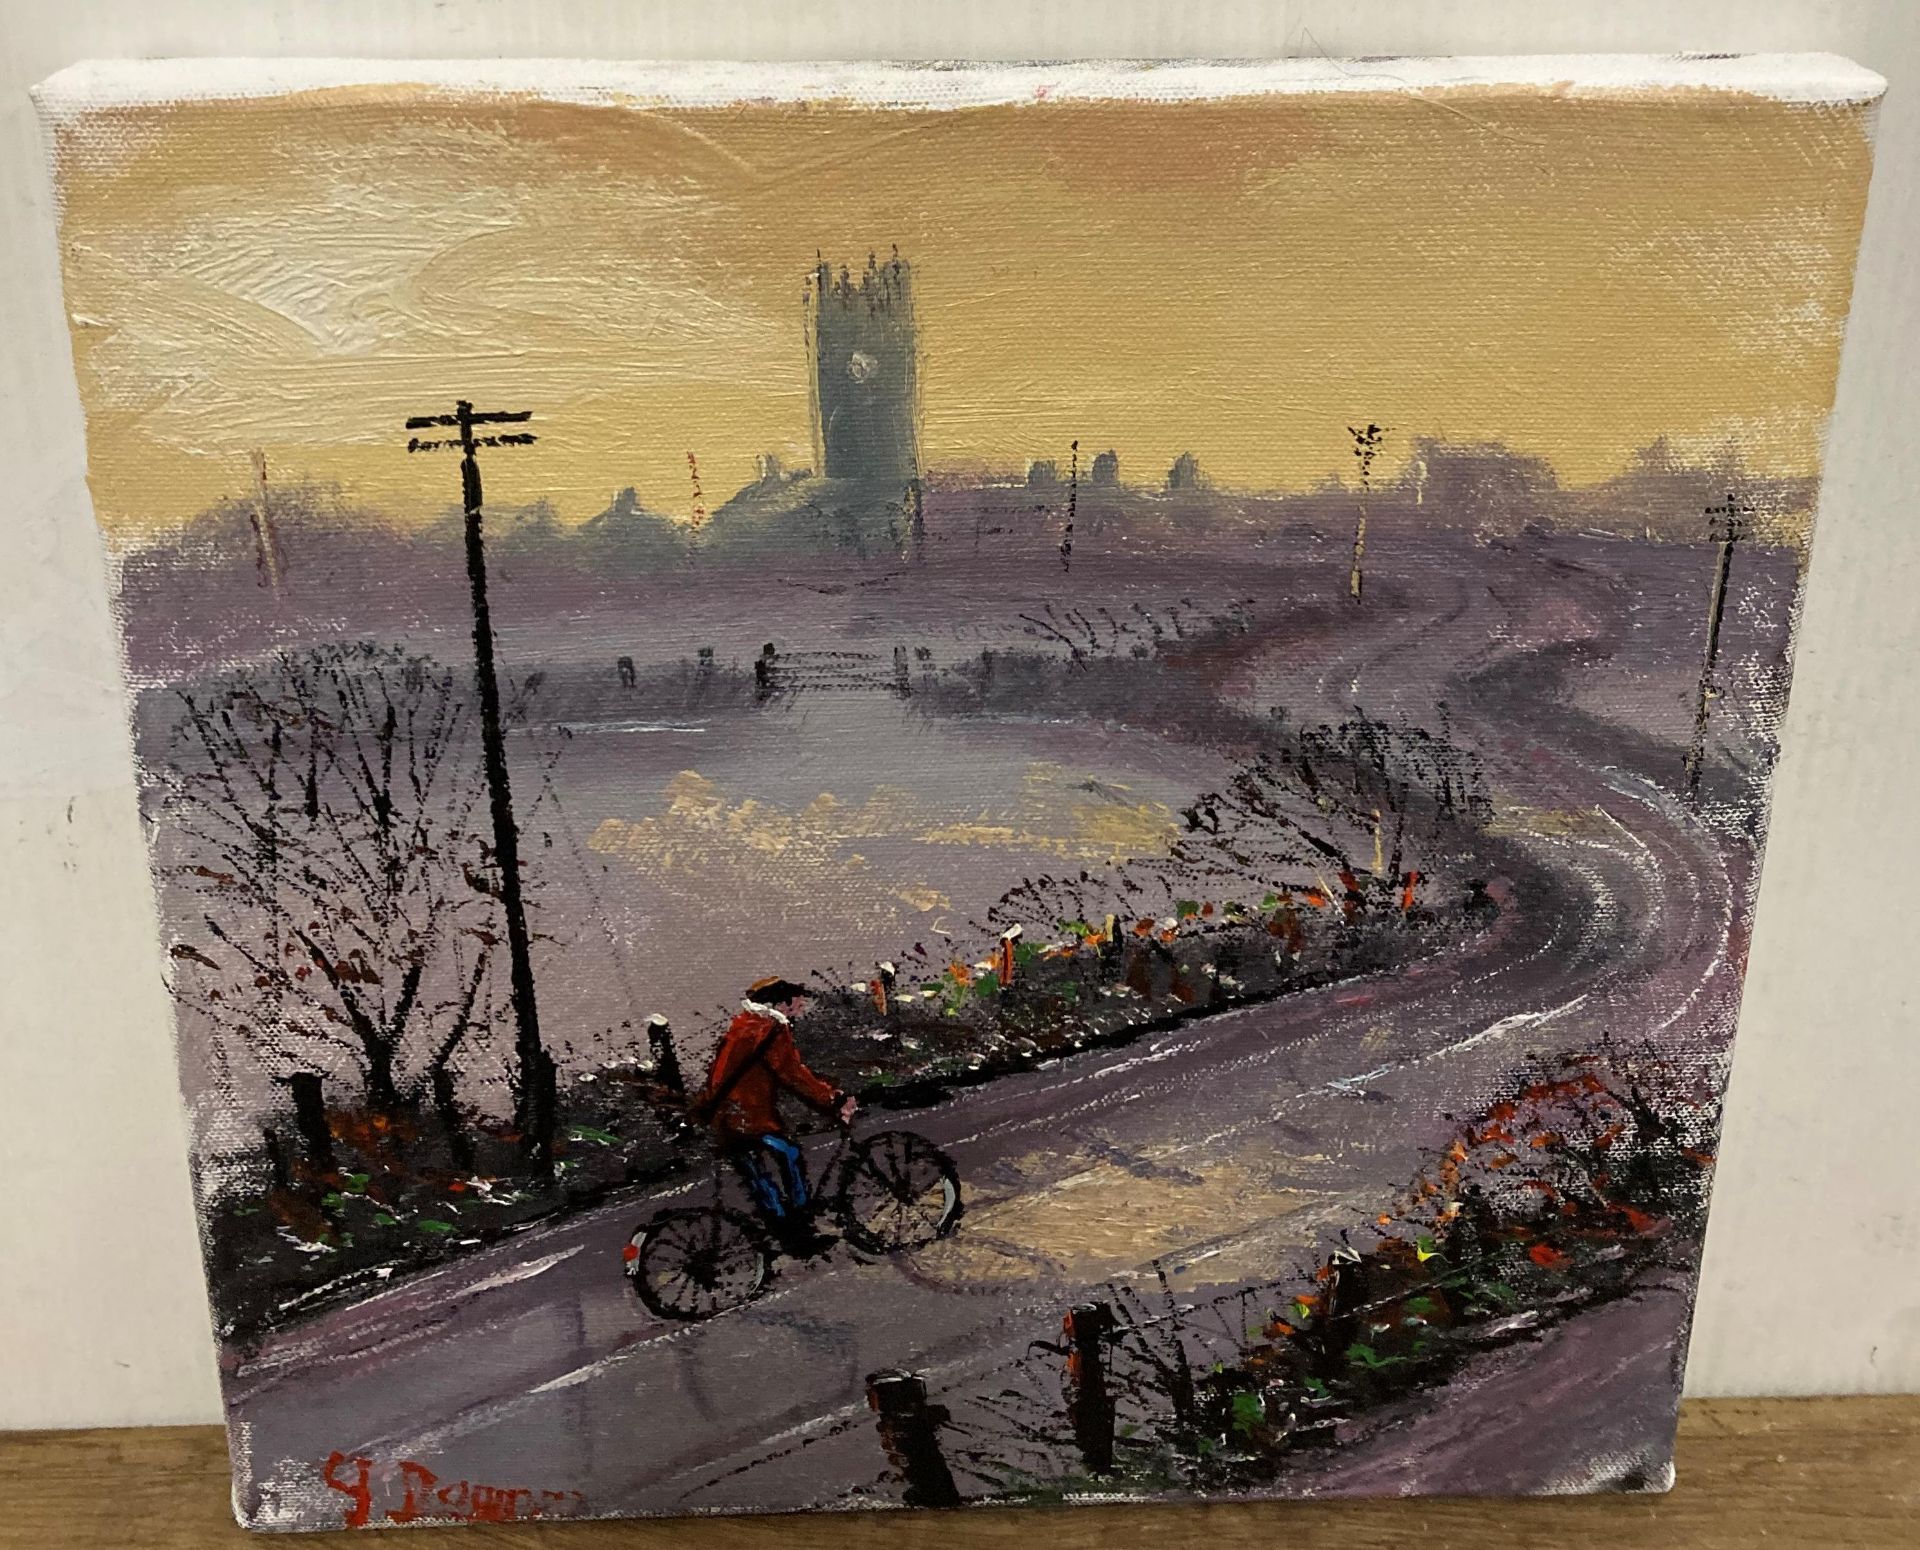 † James Downie oil on canvas 'Bike Ride in The Countryside' 30cm x 30cm, - Image 3 of 4